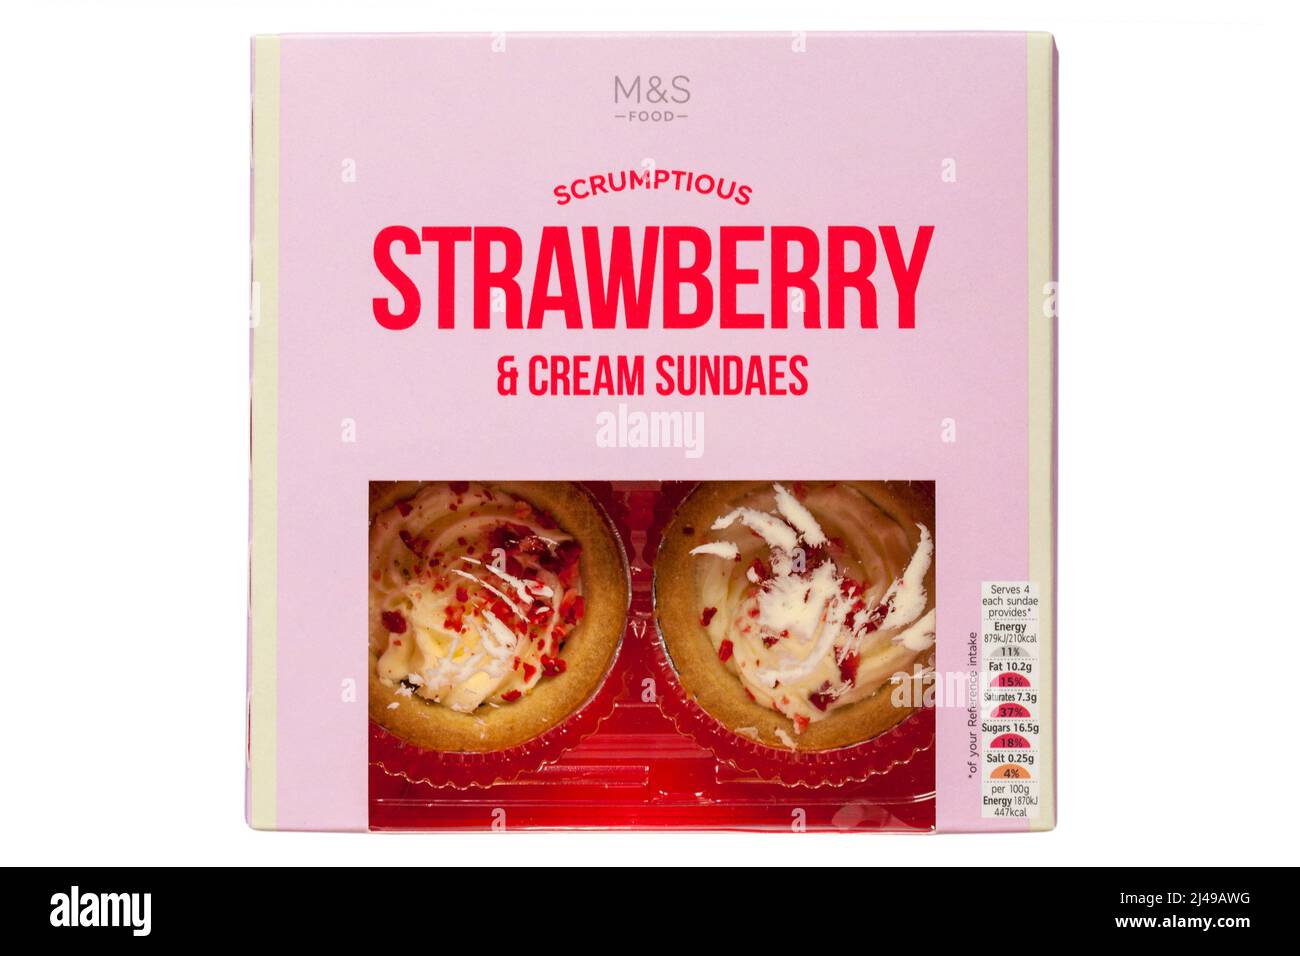 Scrumptious Strawberry & Cream Sundaes from M&S isolated on white background Stock Photo